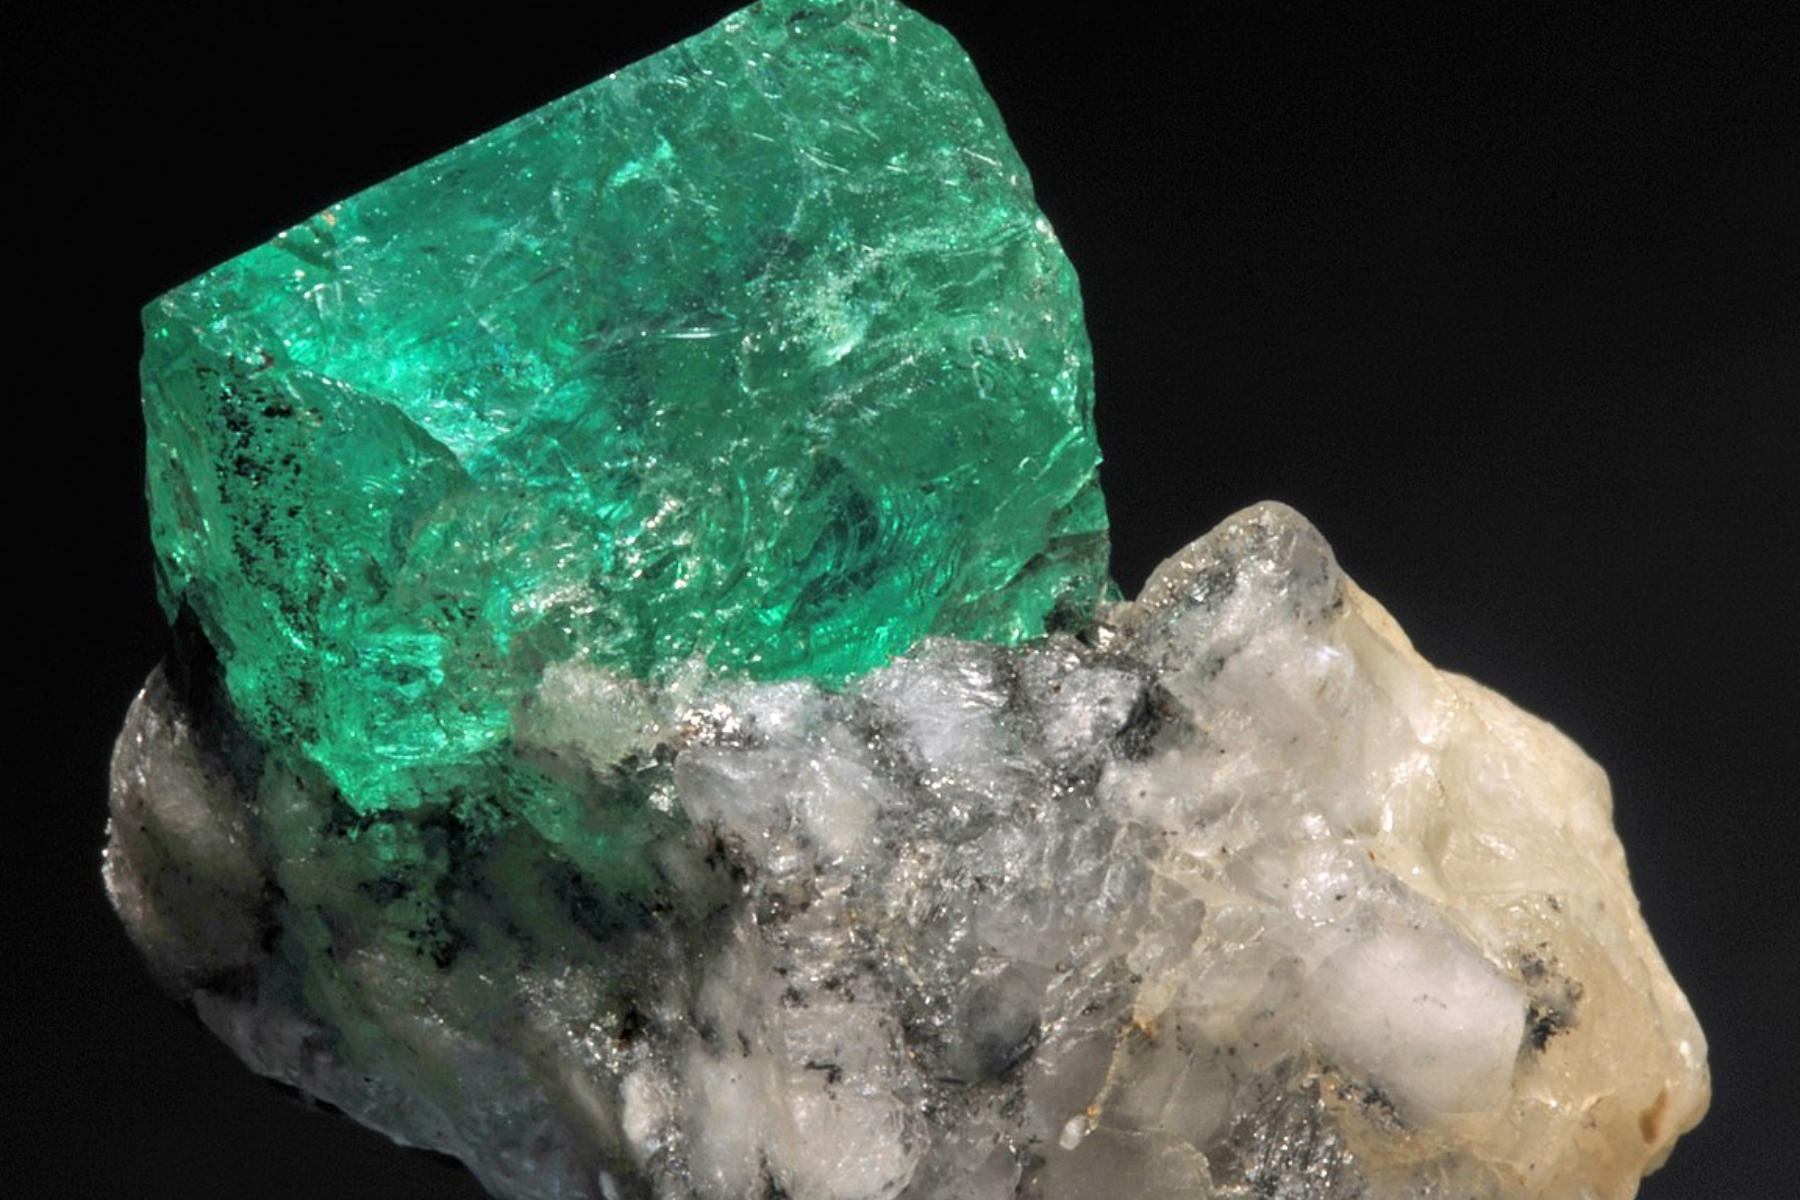 A close-up photograph of an emerald stone attached to its host rock